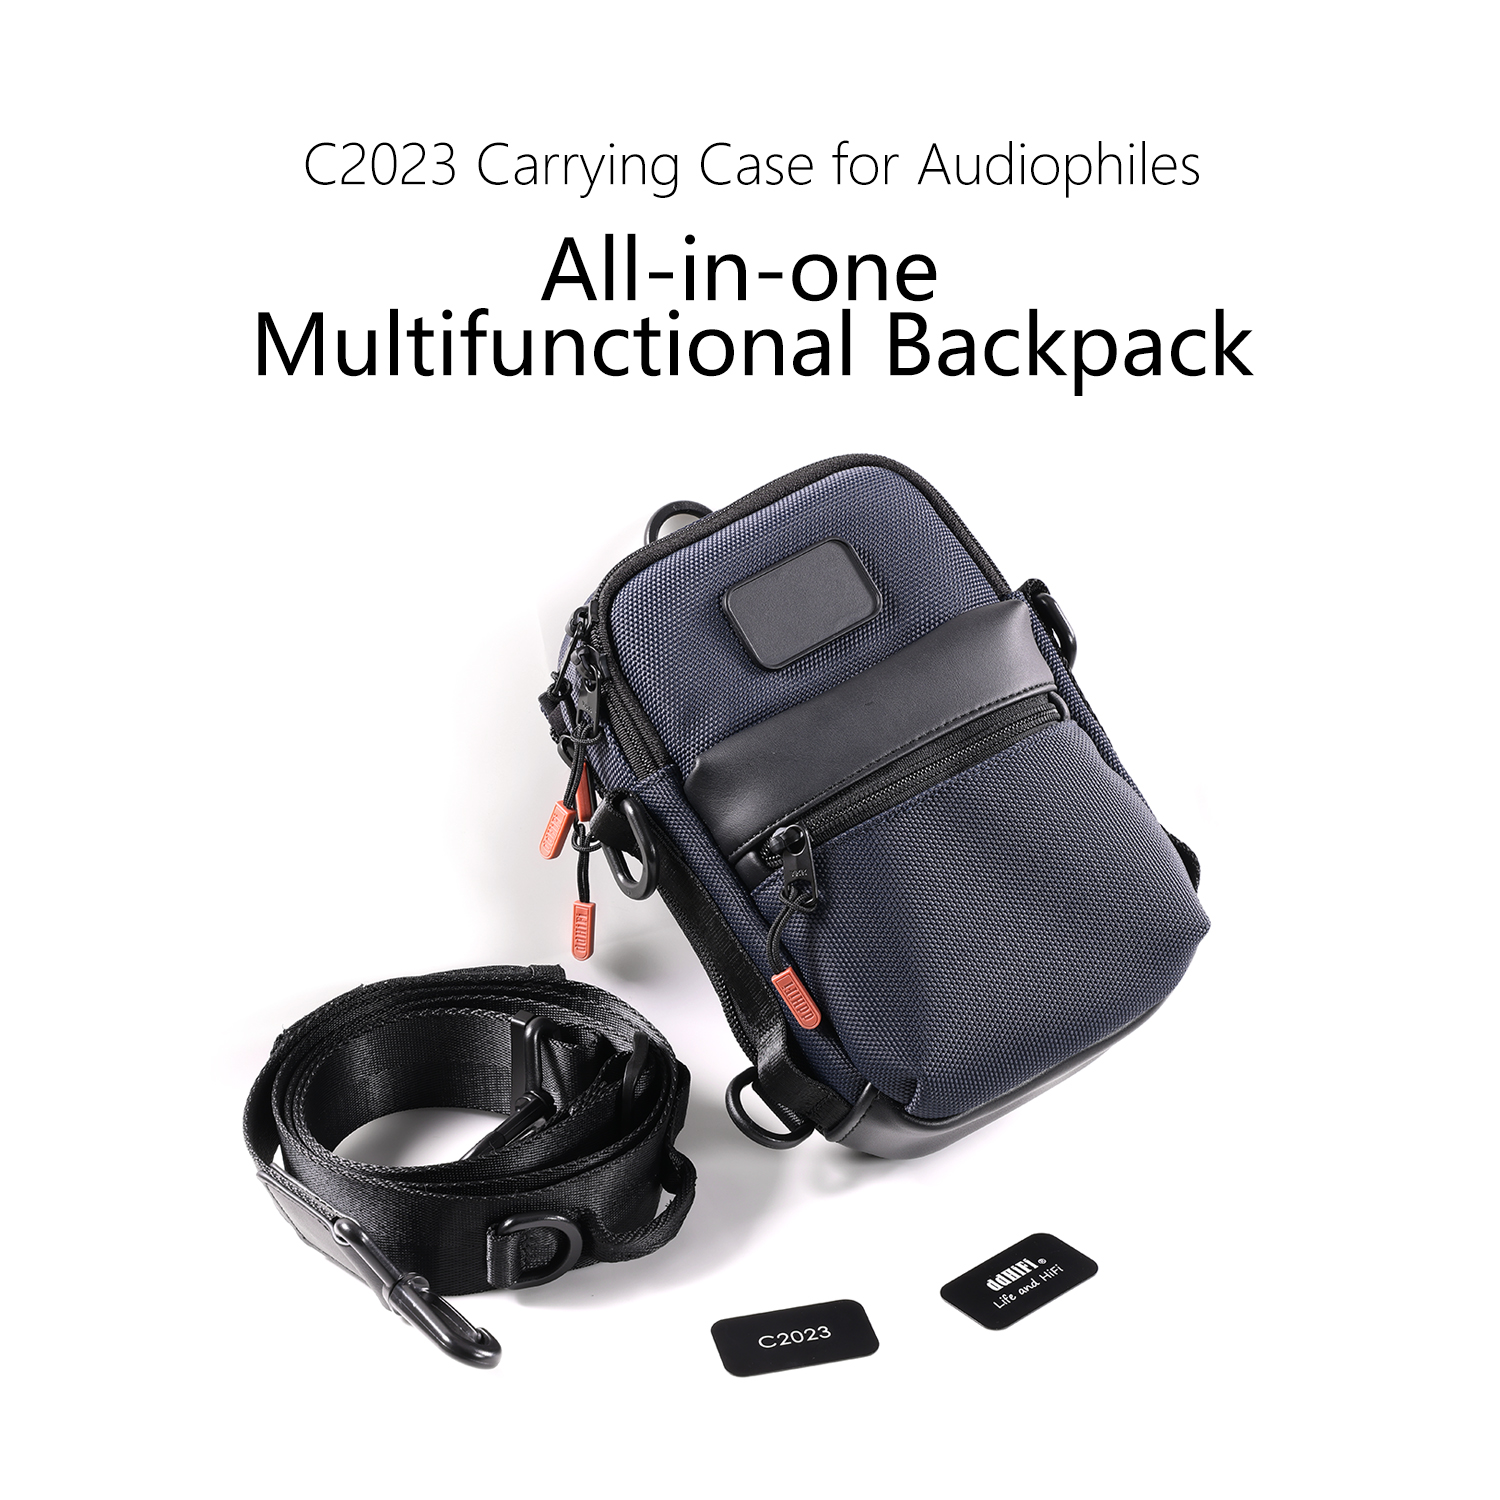 DDHiFi C2023 all-in-one multifunctional backpack